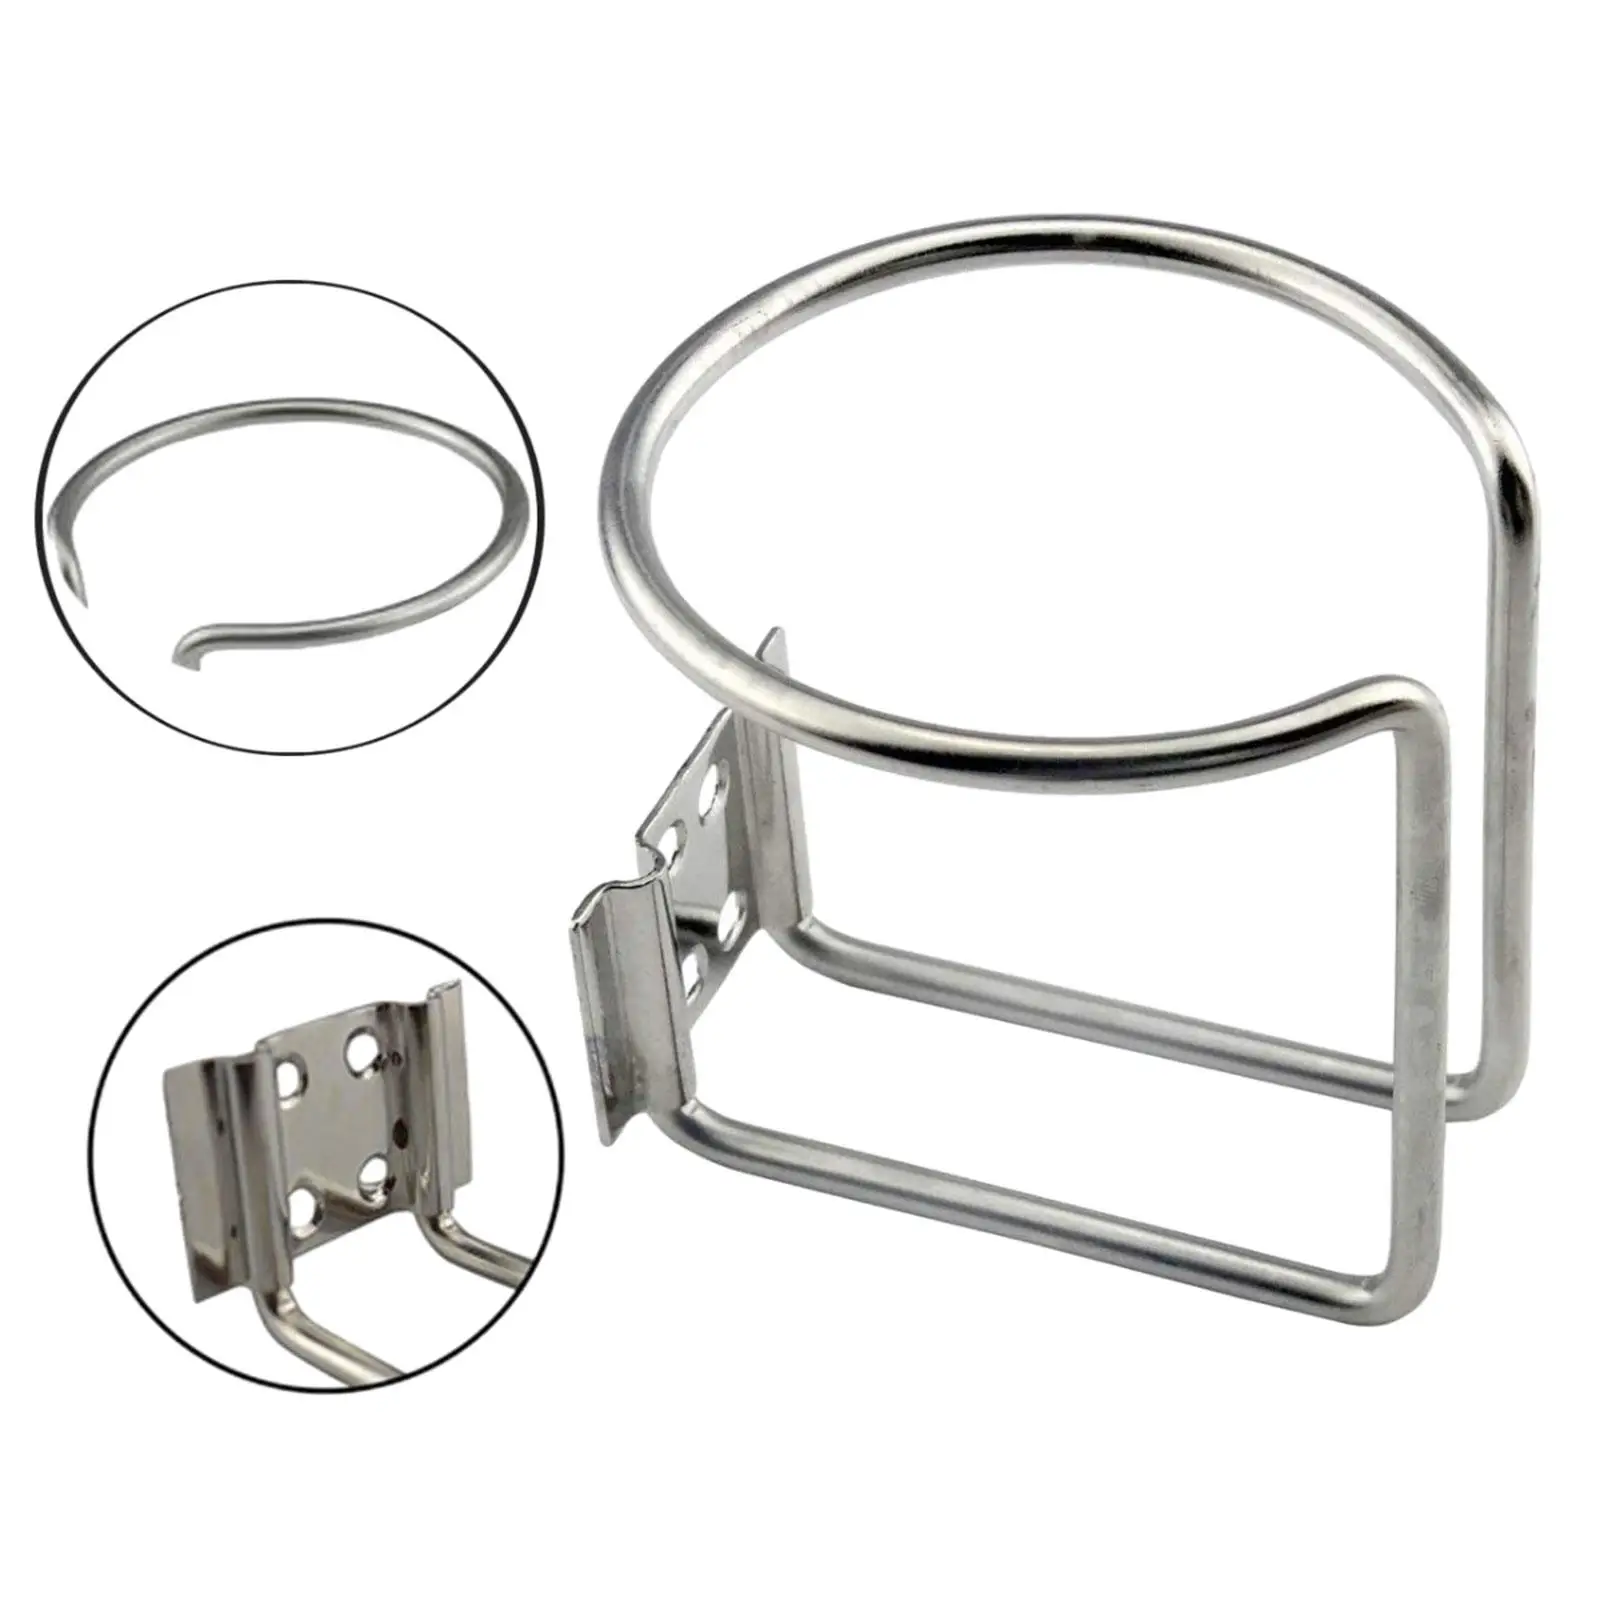 Boat Cup Holder for Beverage Bottles Mugs Universal Stainless Steel Cup Drink Holders for RV Yacht Car Trailer Accessory